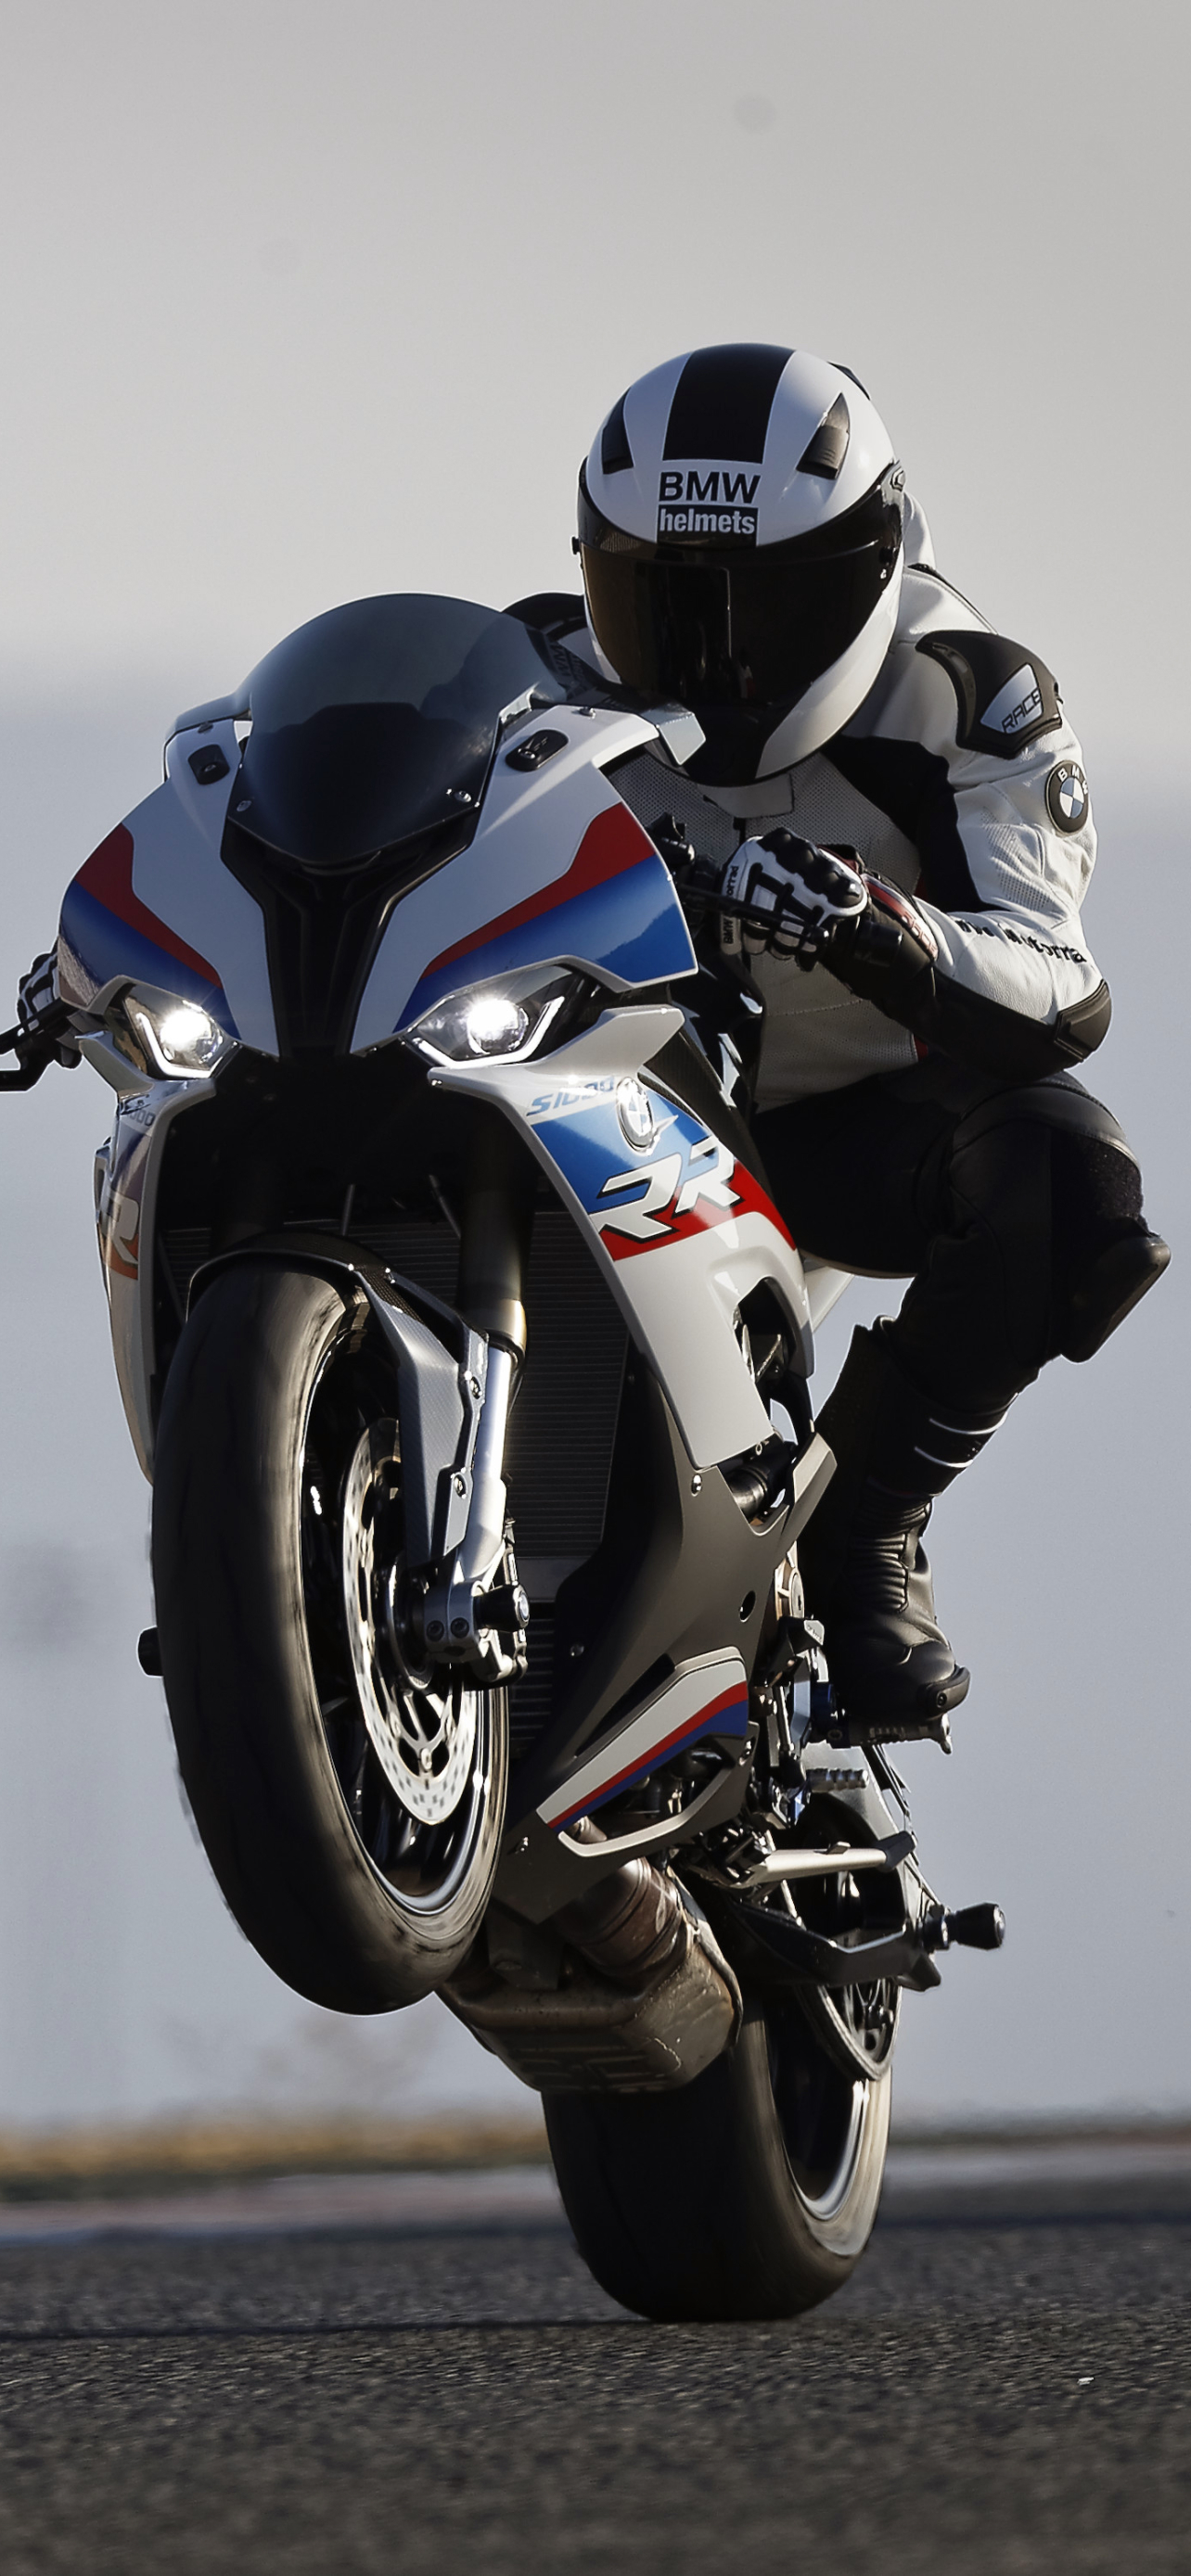 bmw s1000rr, bmw s1000, motorcycles, vehicles, motorcycle